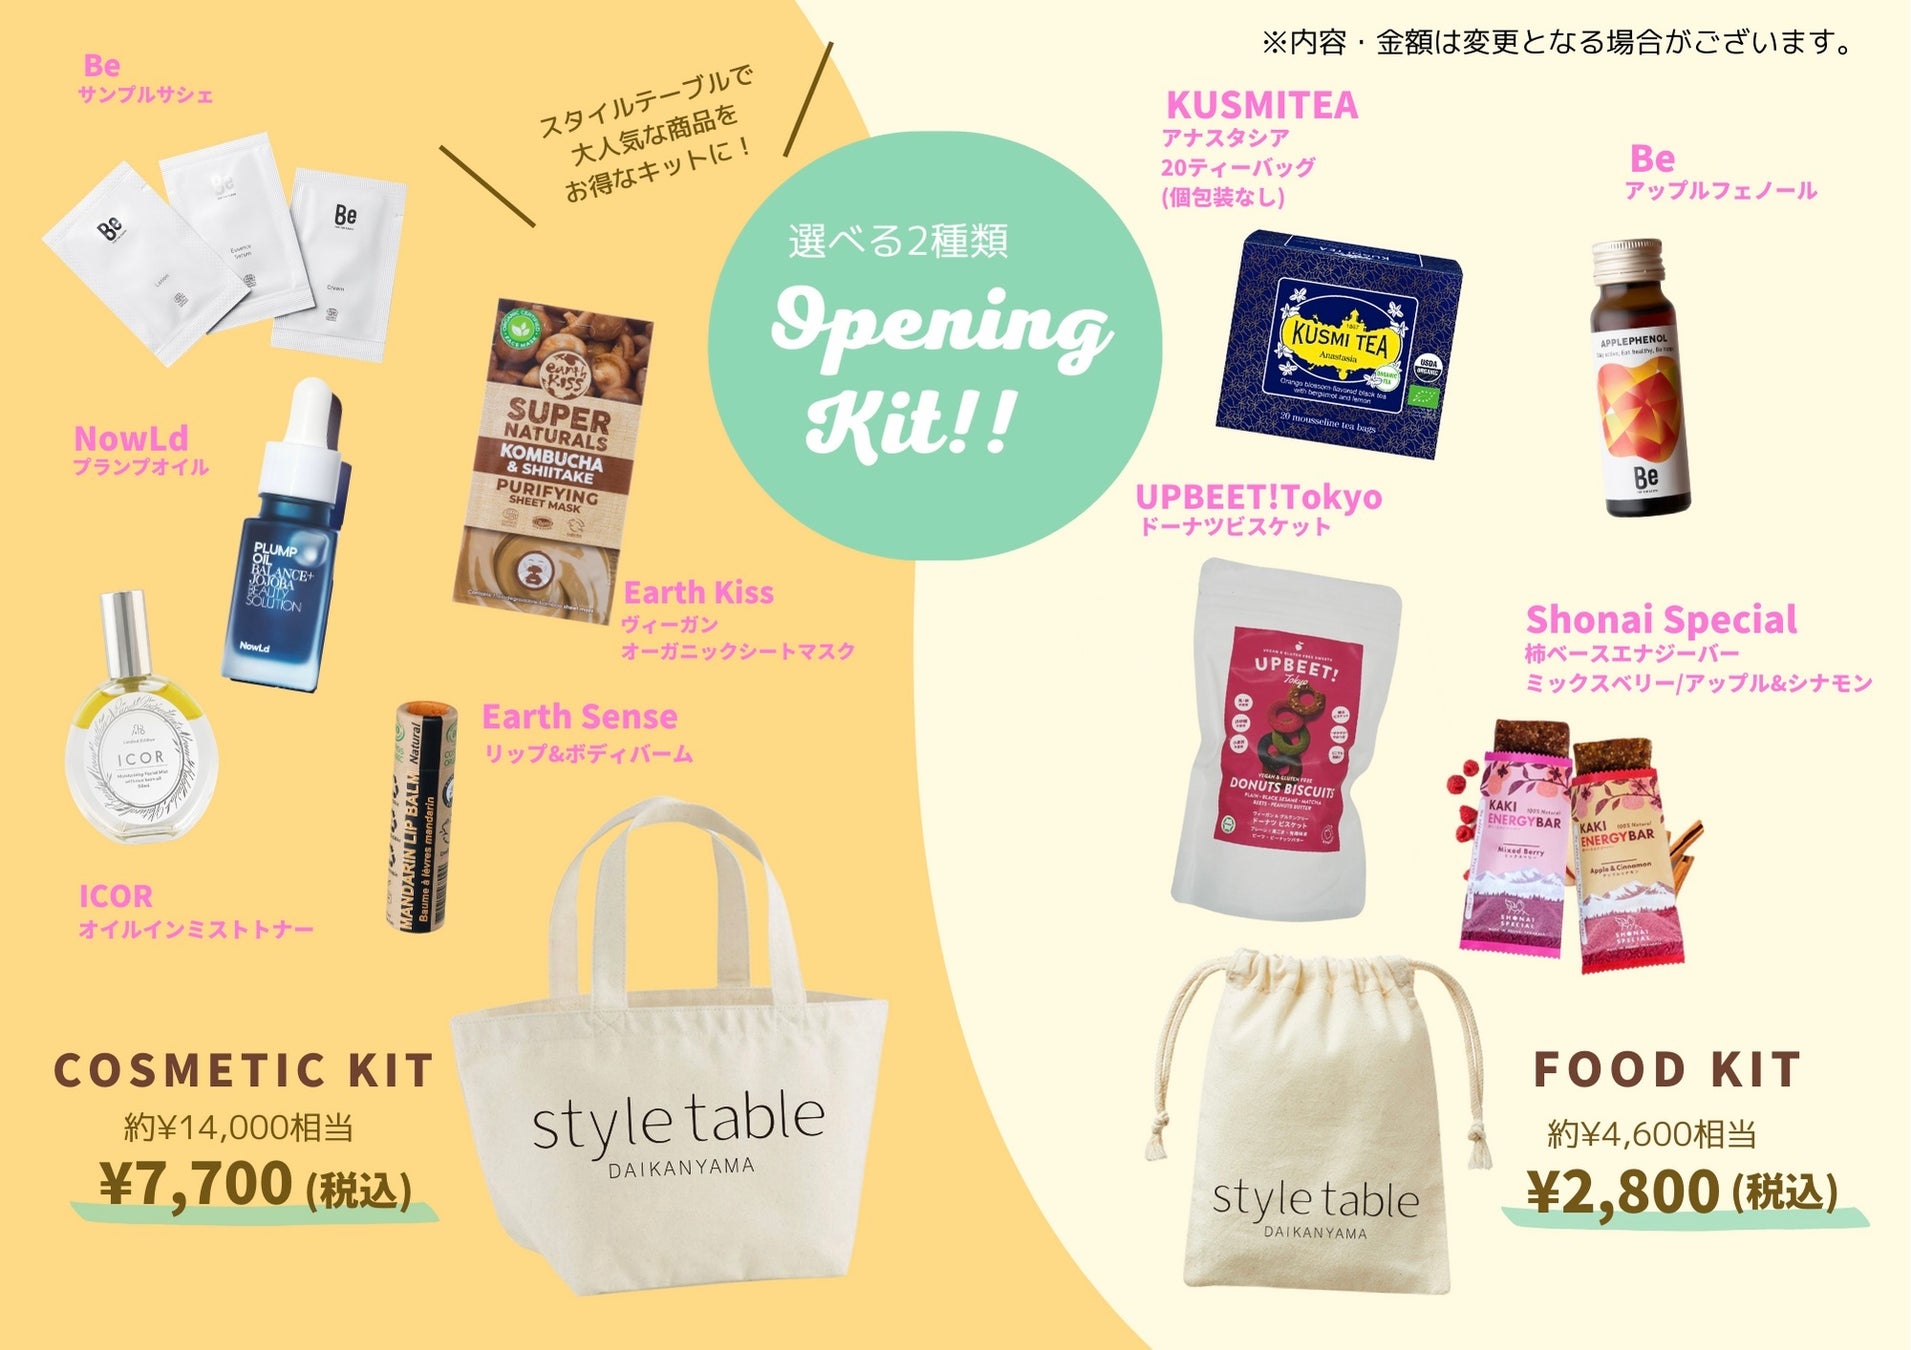 【style table 新業態】エシカルギフトに特化した style table for ethical gifts が渋谷ヒカリエShinQs にオープンのサブ画像2